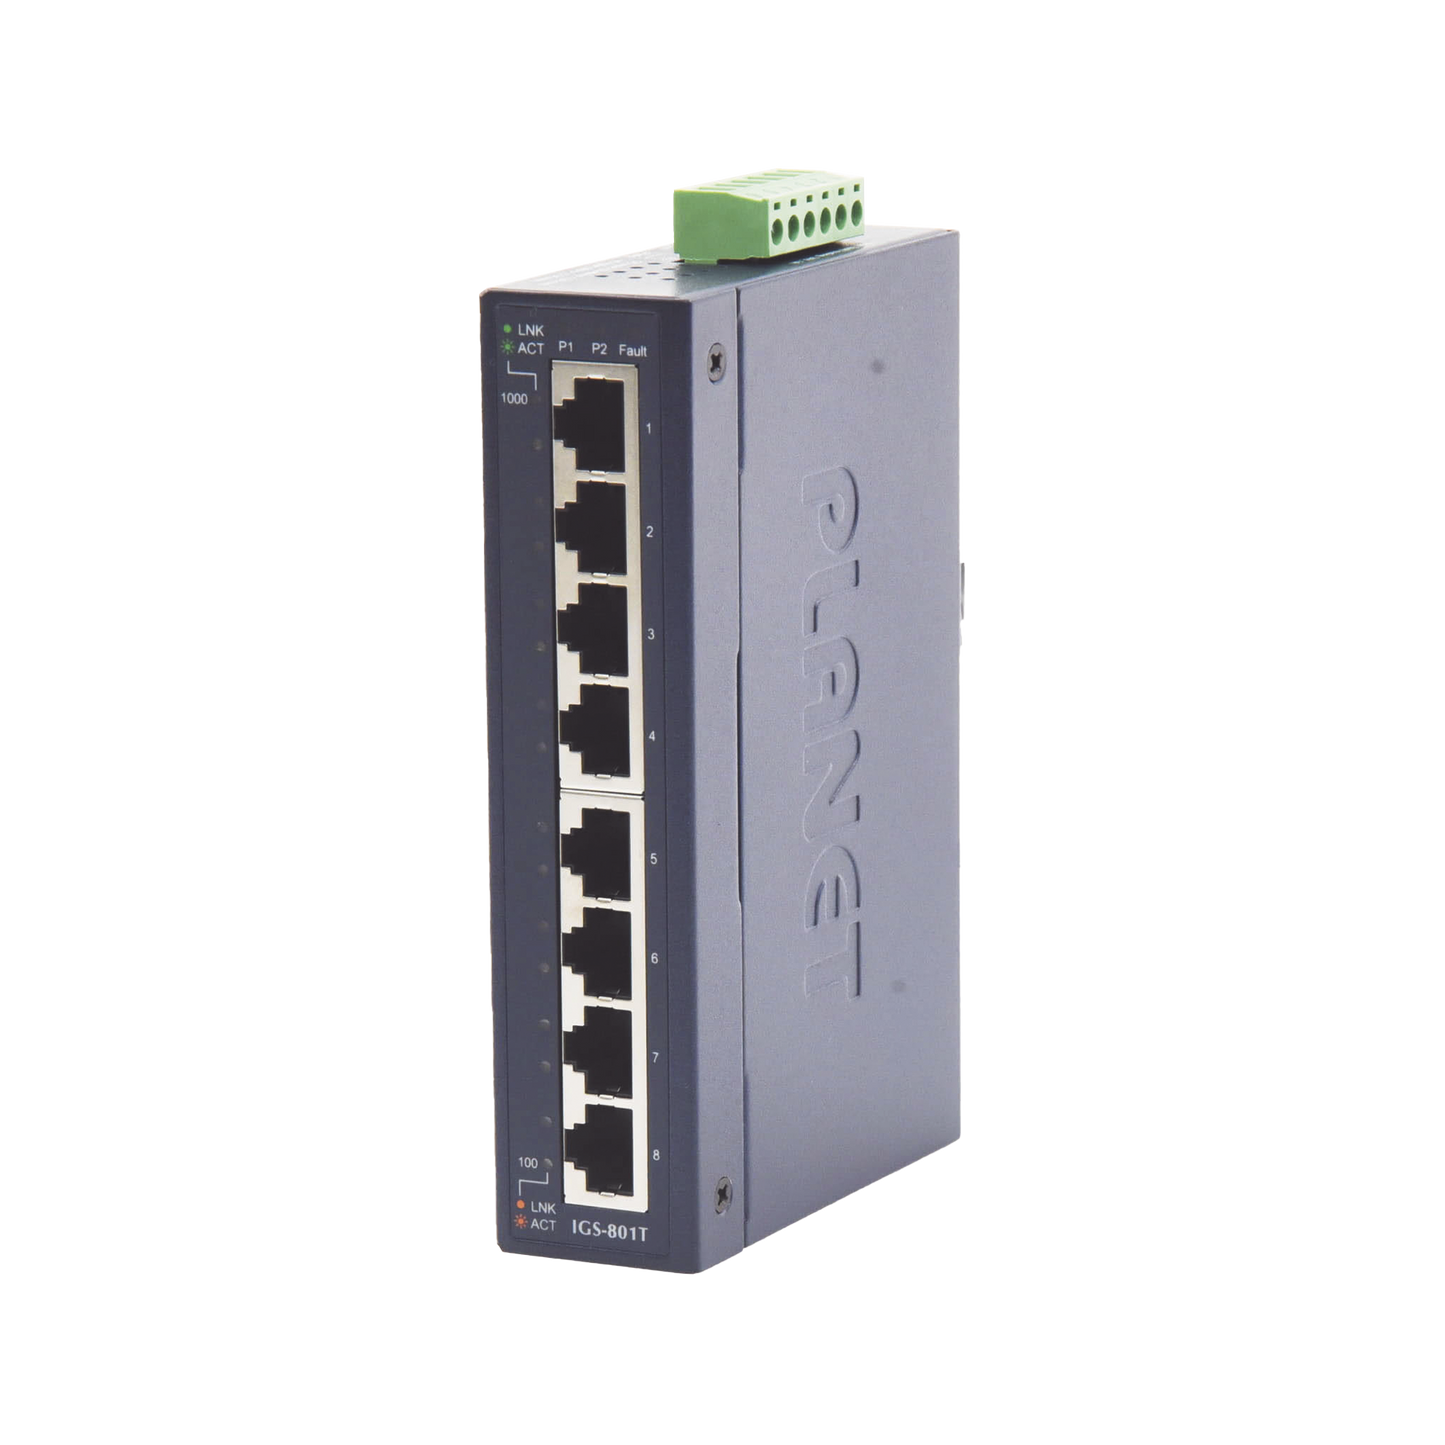 8 Port Gibabit 10/100 / 1000T Industrial Switch, Designed for Wall and DIN Rail Mounting